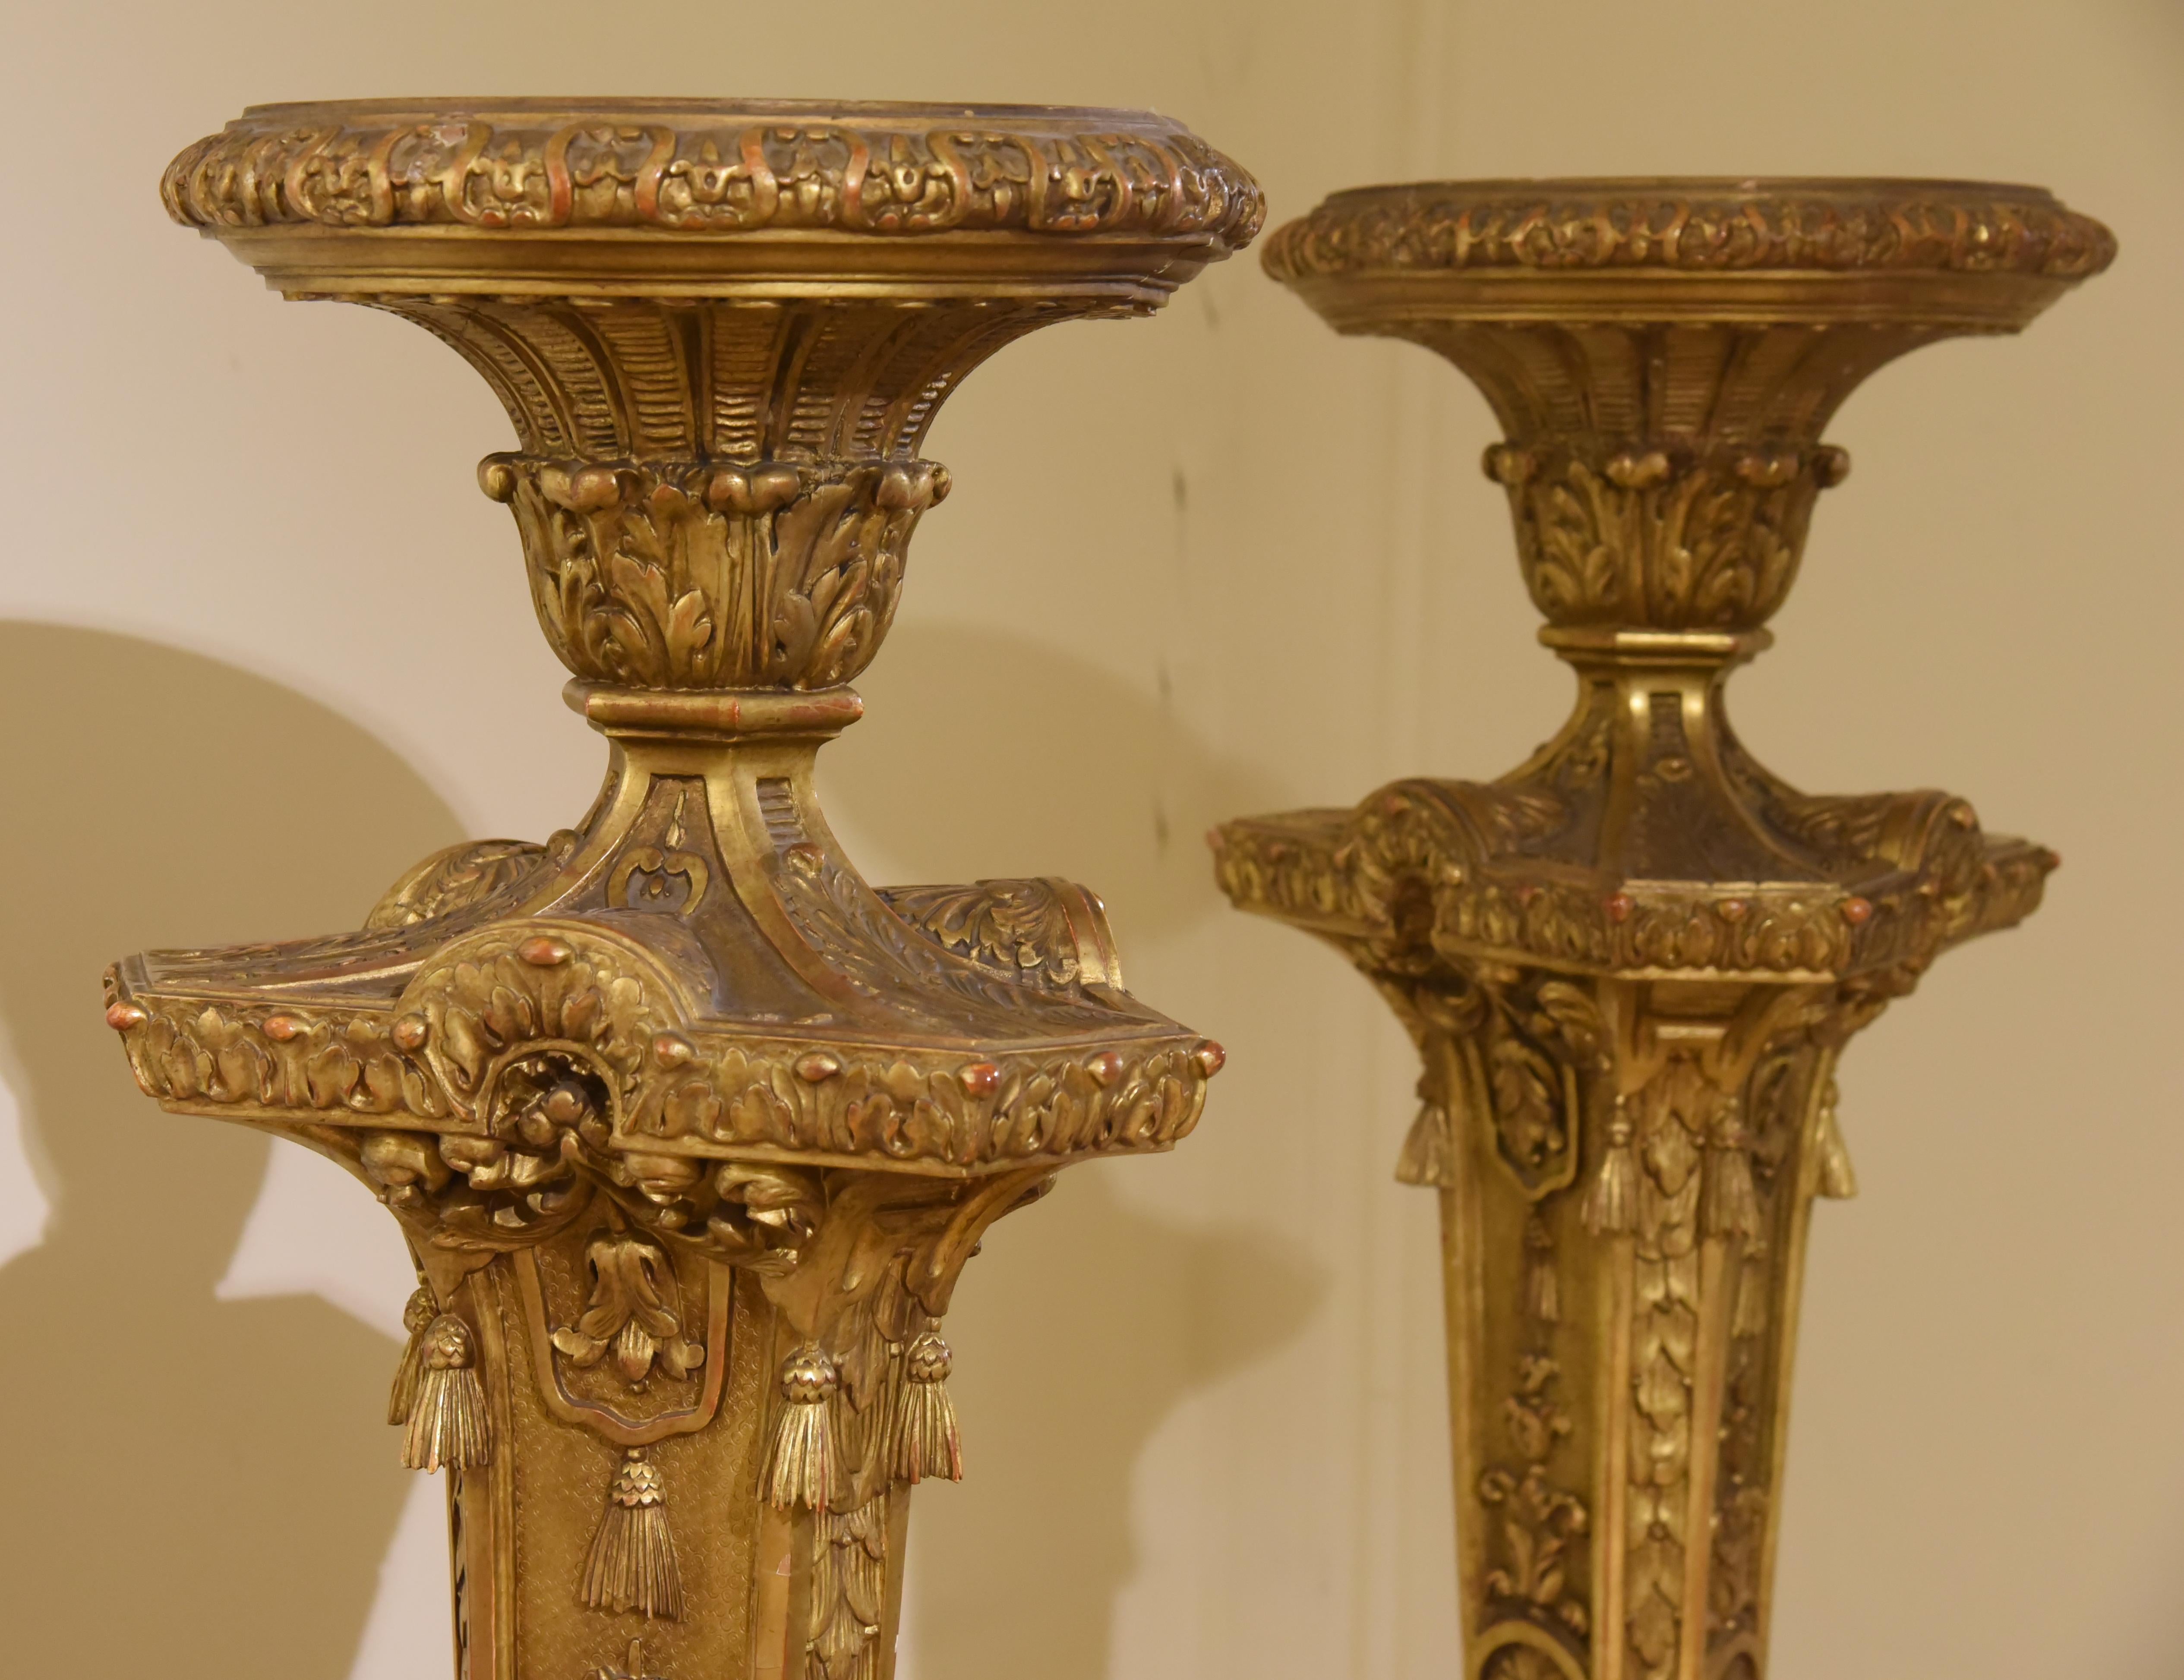 Pair of 19th Century Candlesticks, Napoleon III style, Hand Carved, Gilding in pure Gold Leaf, made in the late 1800s, French origin.